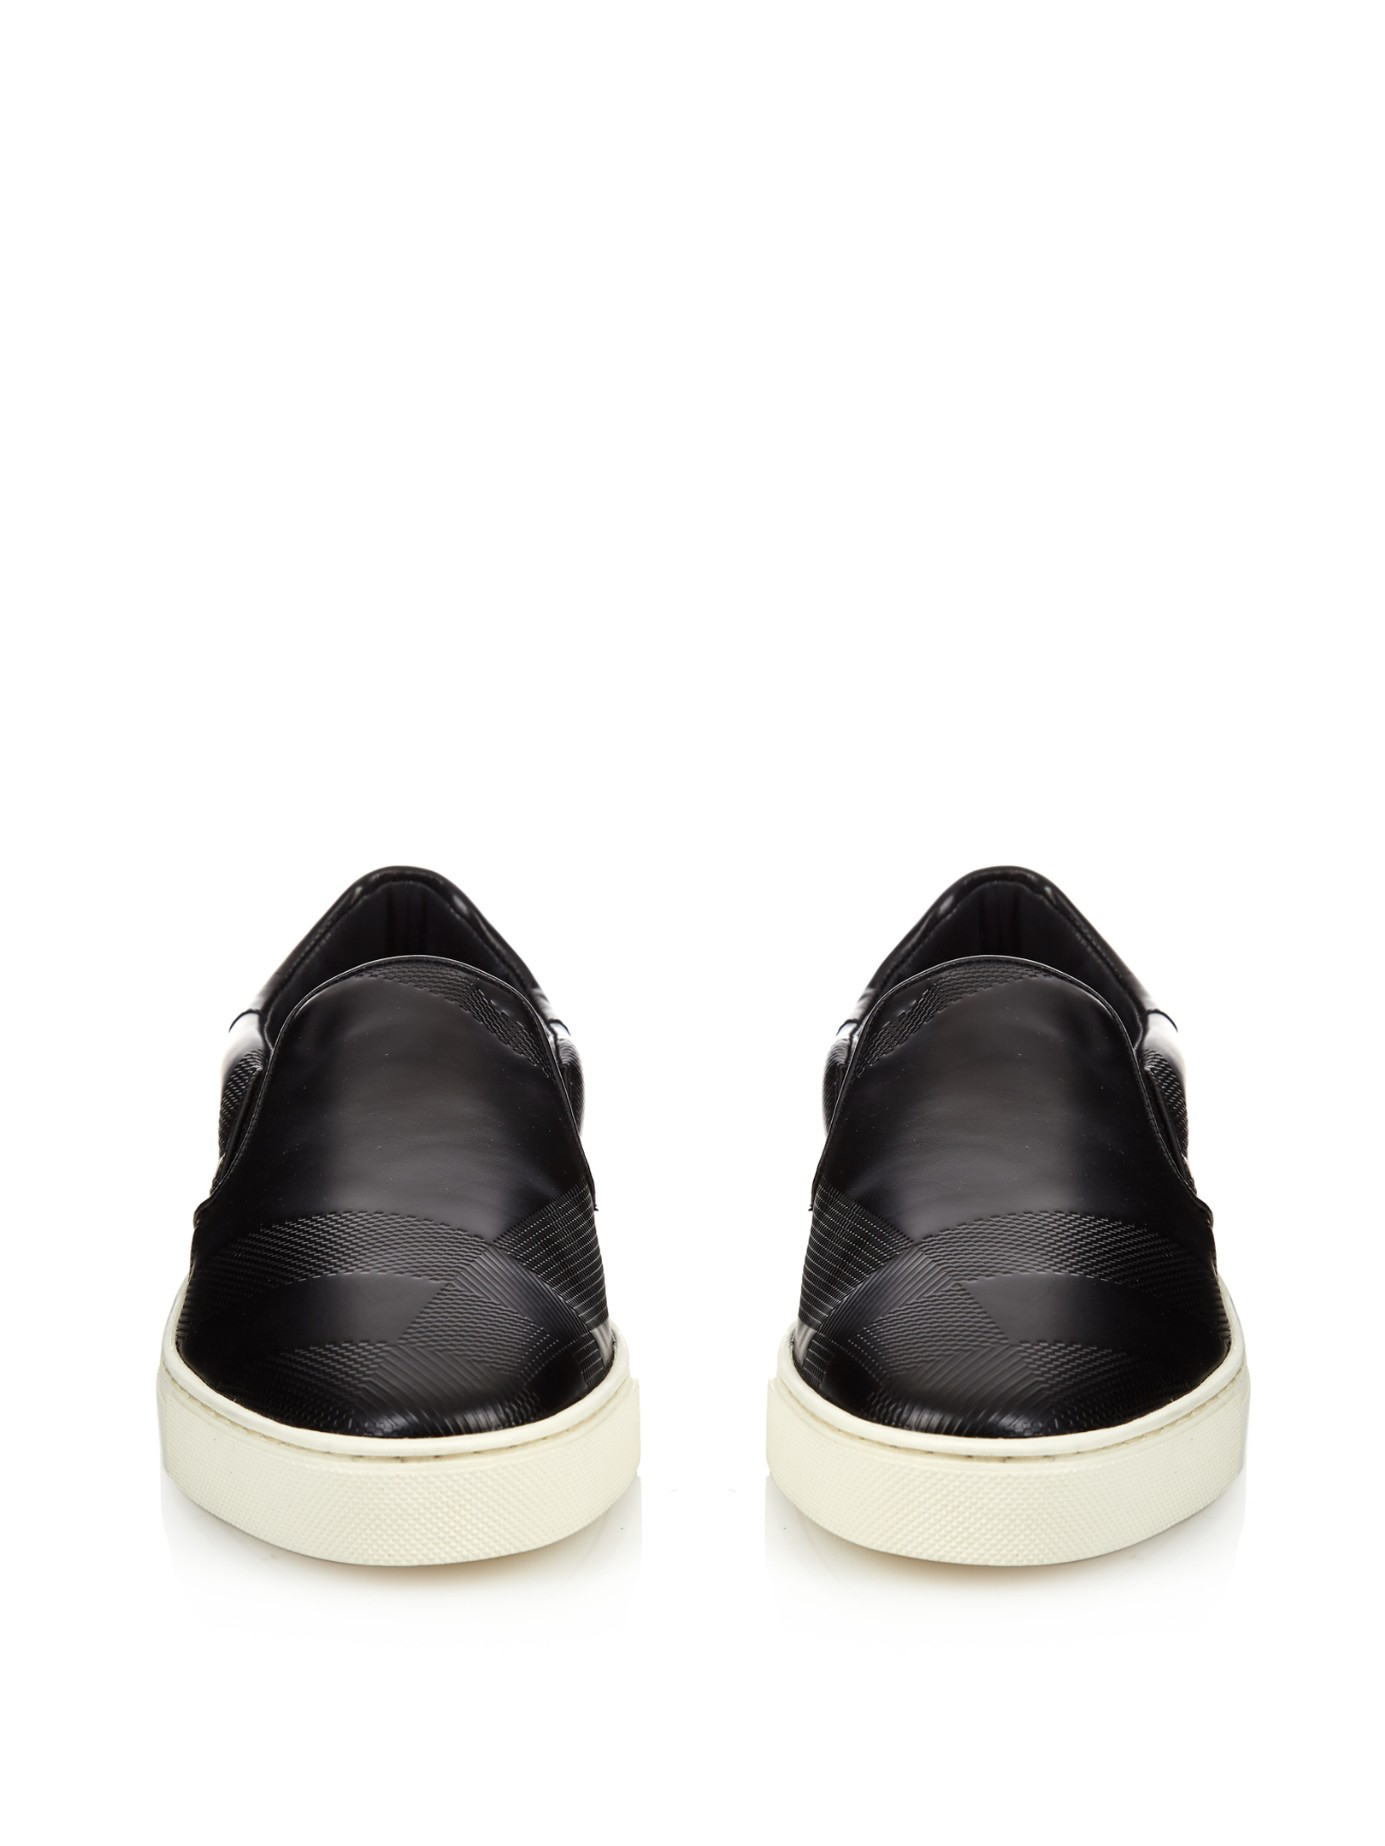 Burberry Check-embossed Leather Slip-on Trainers in Black Men